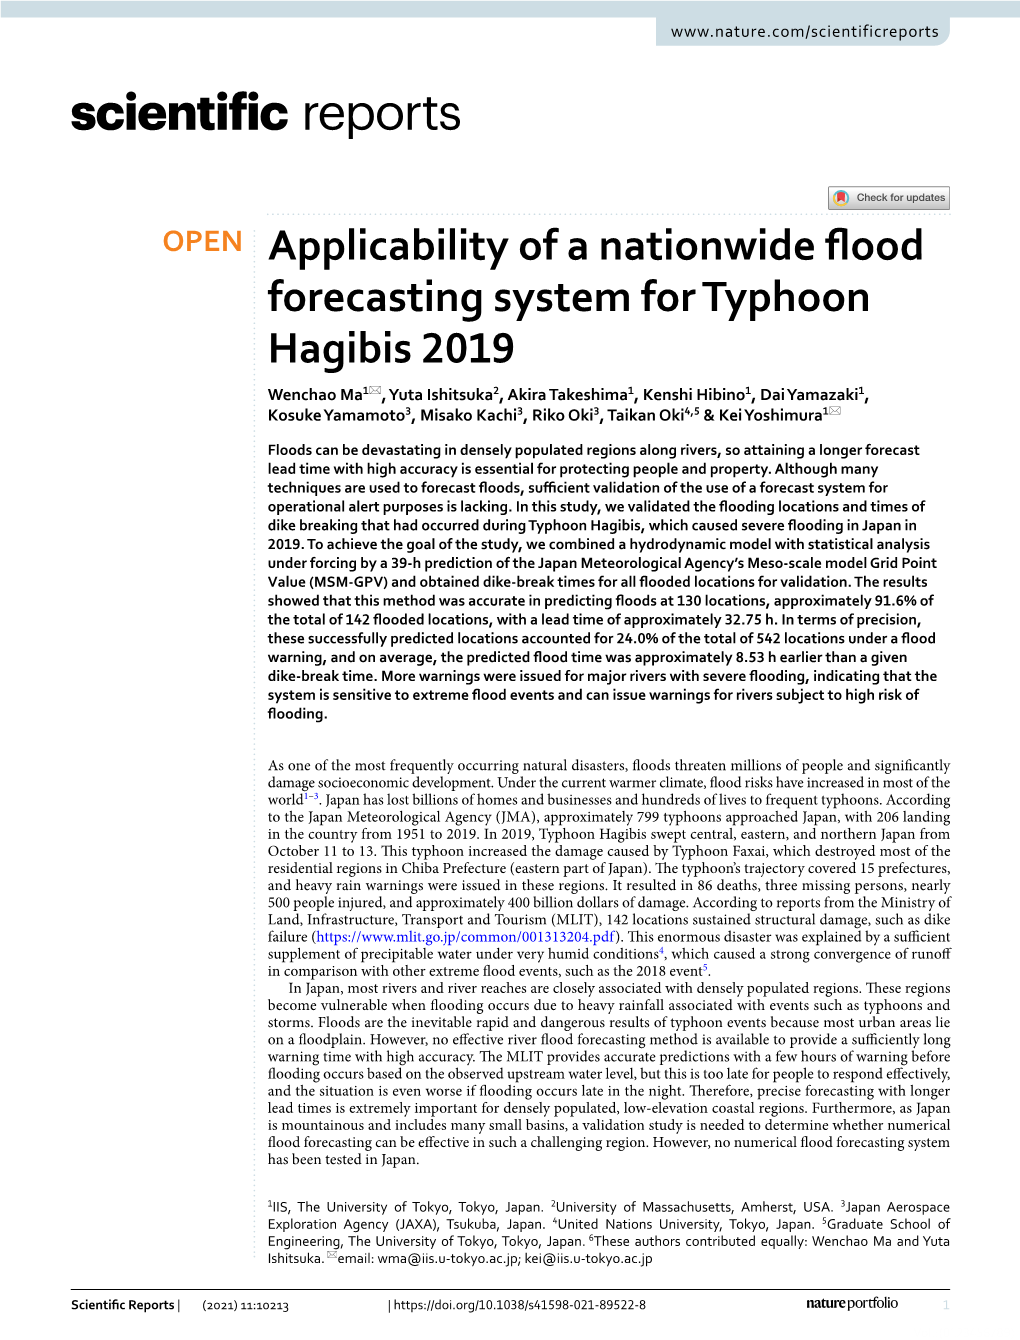 Applicability of a Nationwide Flood Forecasting System for Typhoon